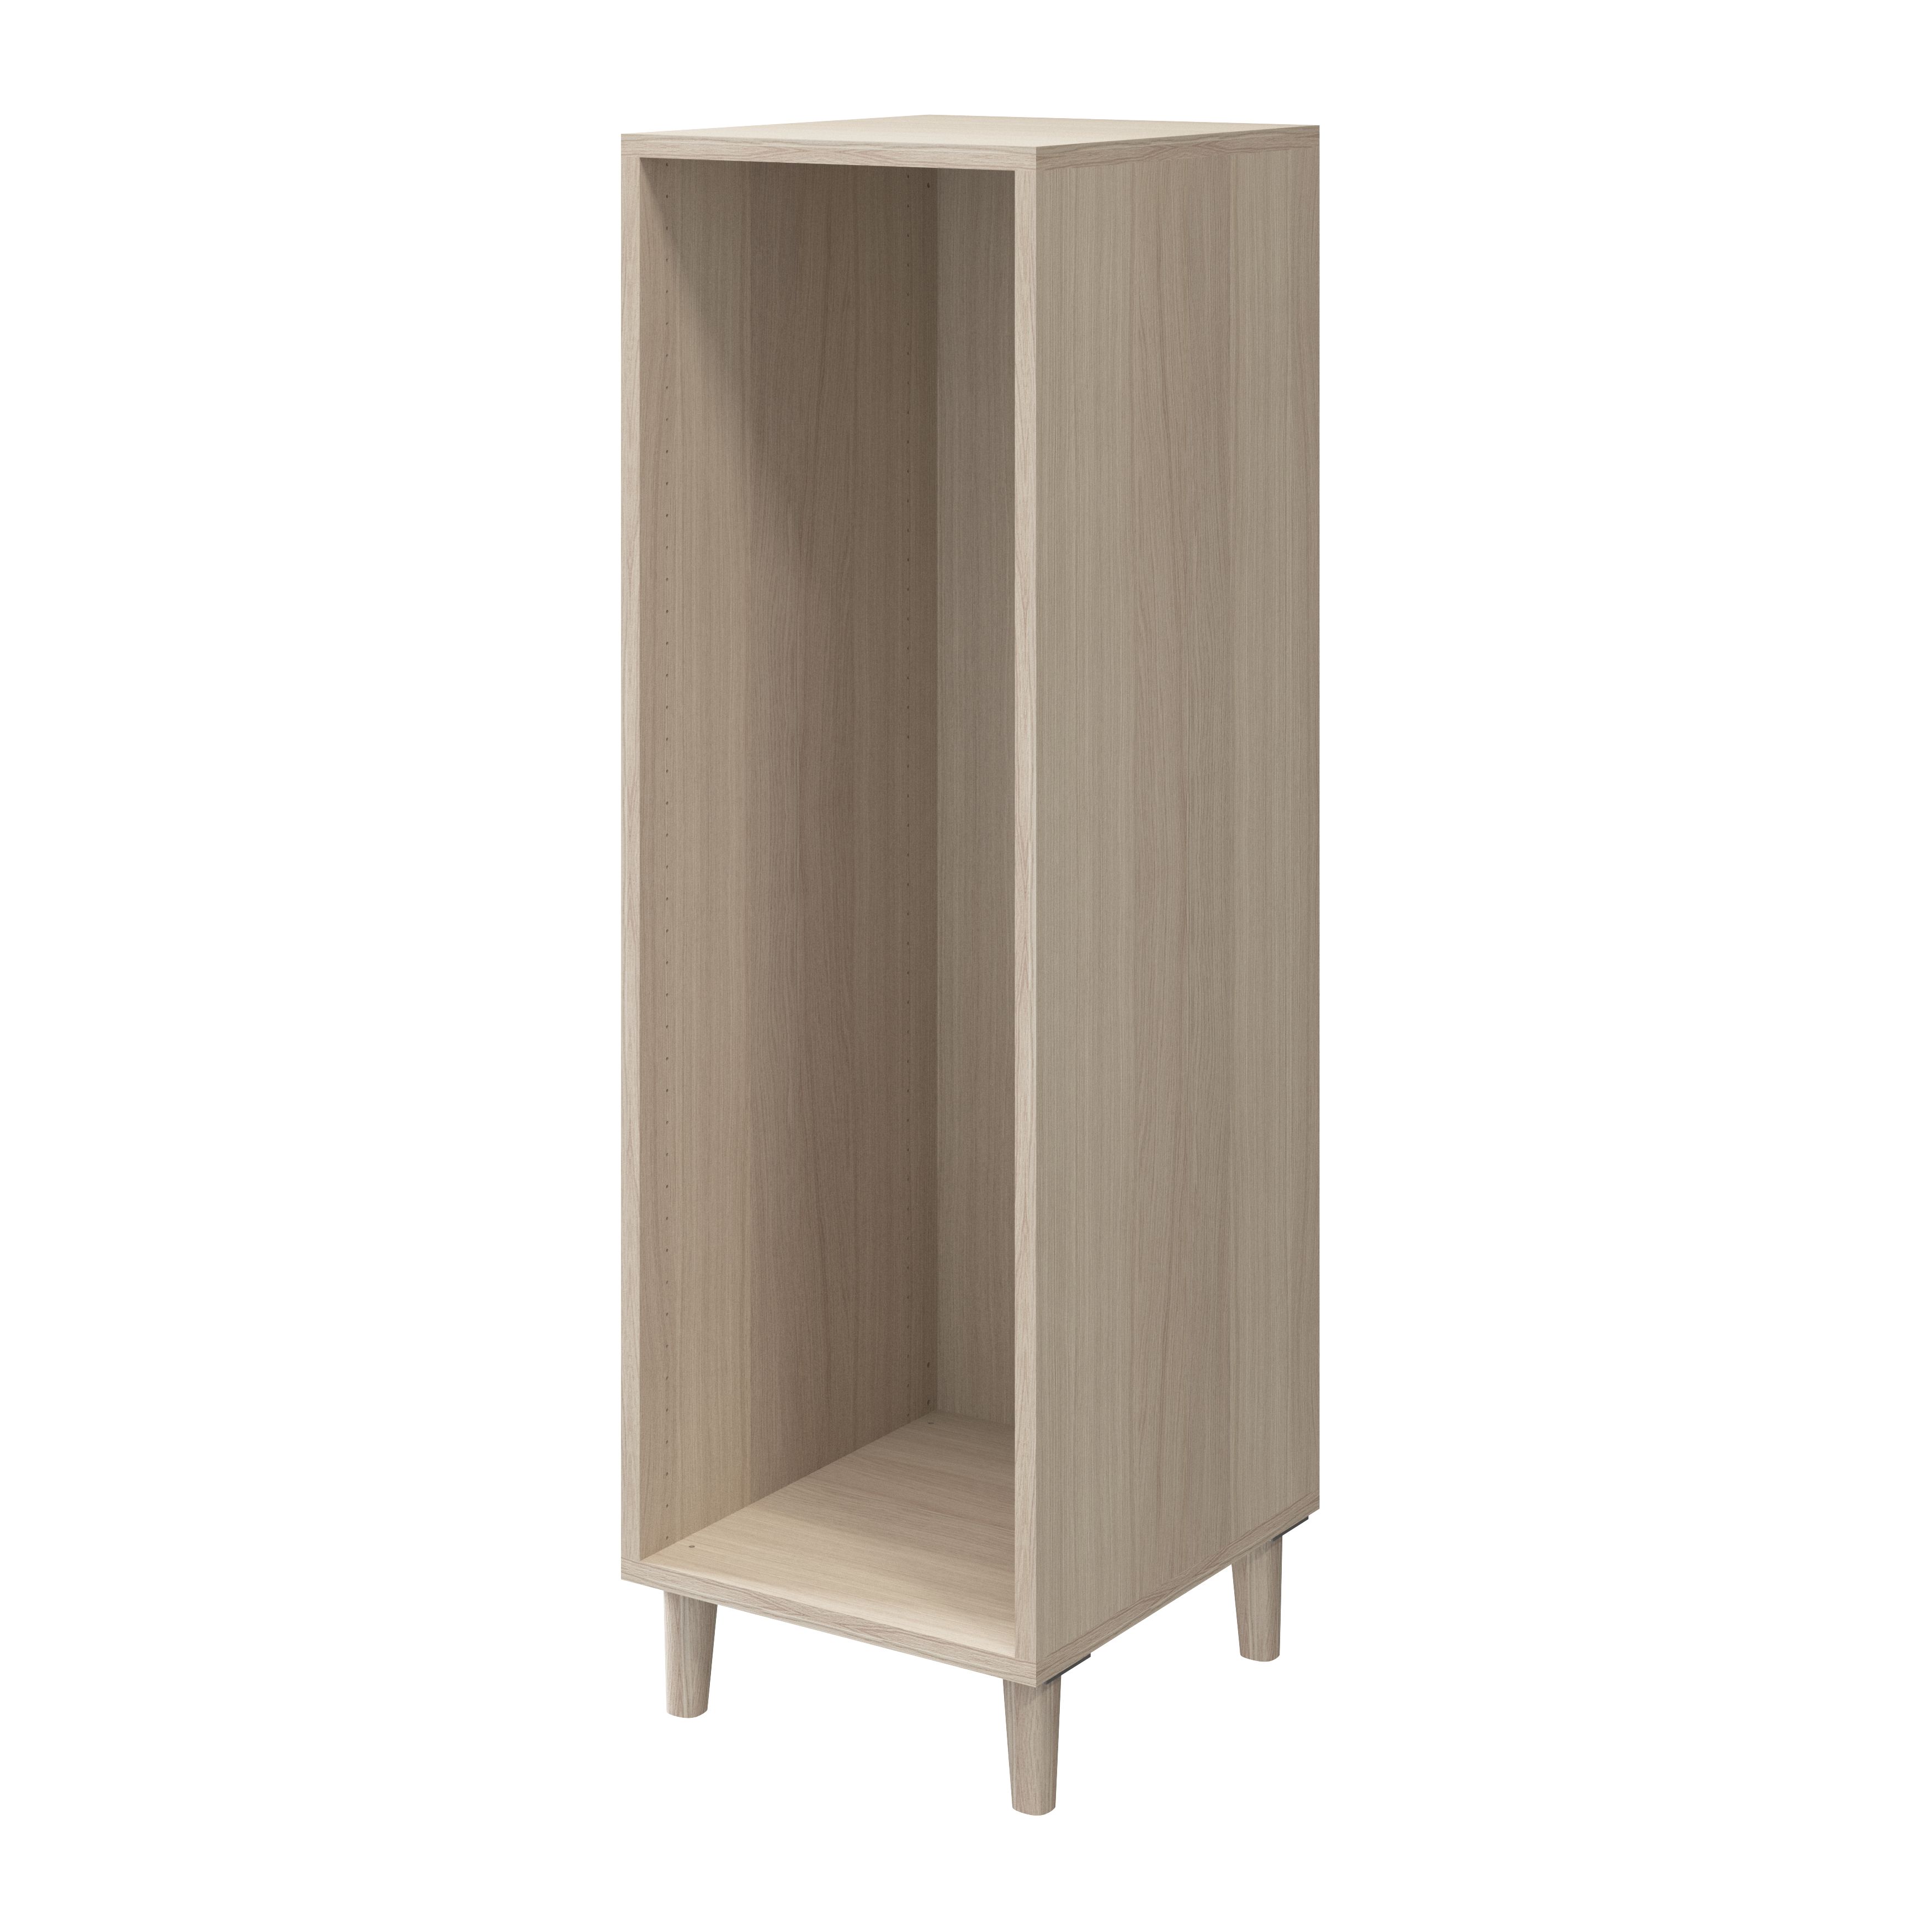 Atomia Freestanding White oak effect 6 Drawer Tall Chest of drawers (H)1225mm (W)375mm (D)470mm